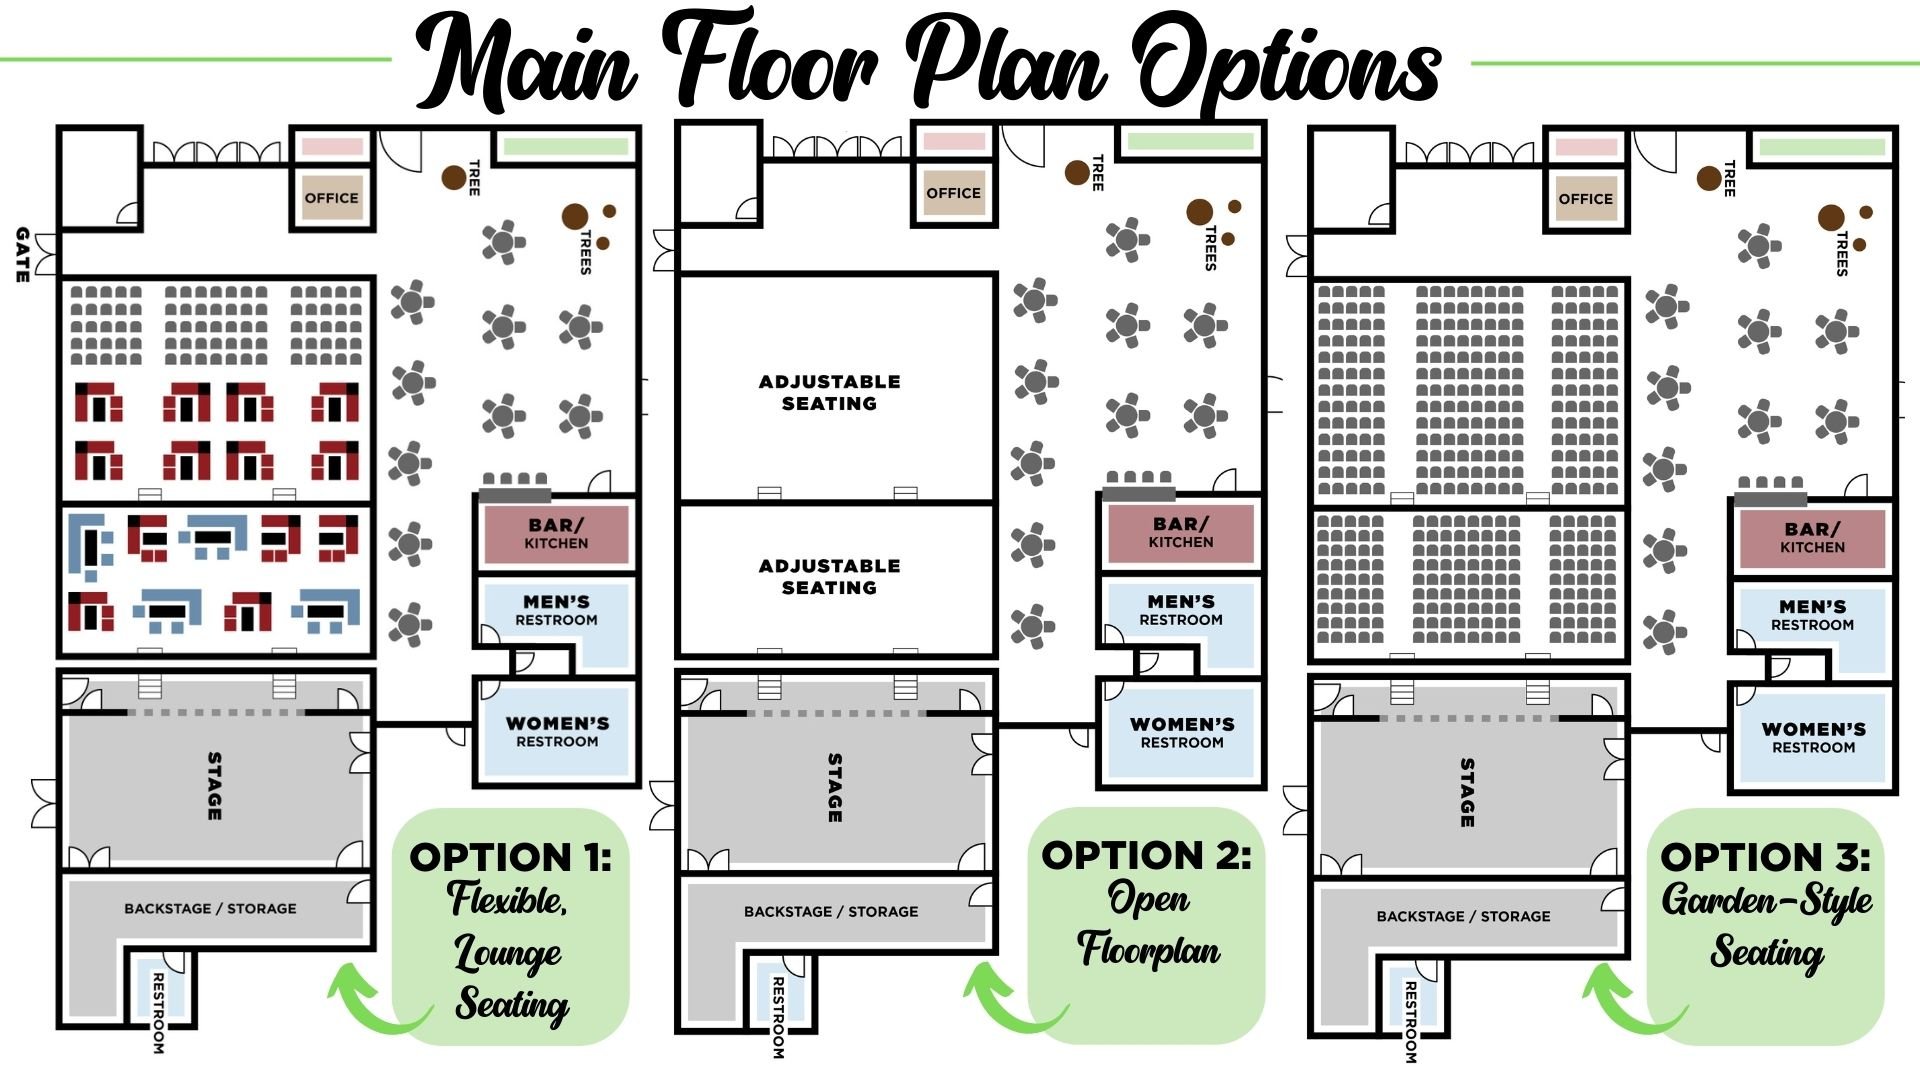 Floor plan options for private rentals